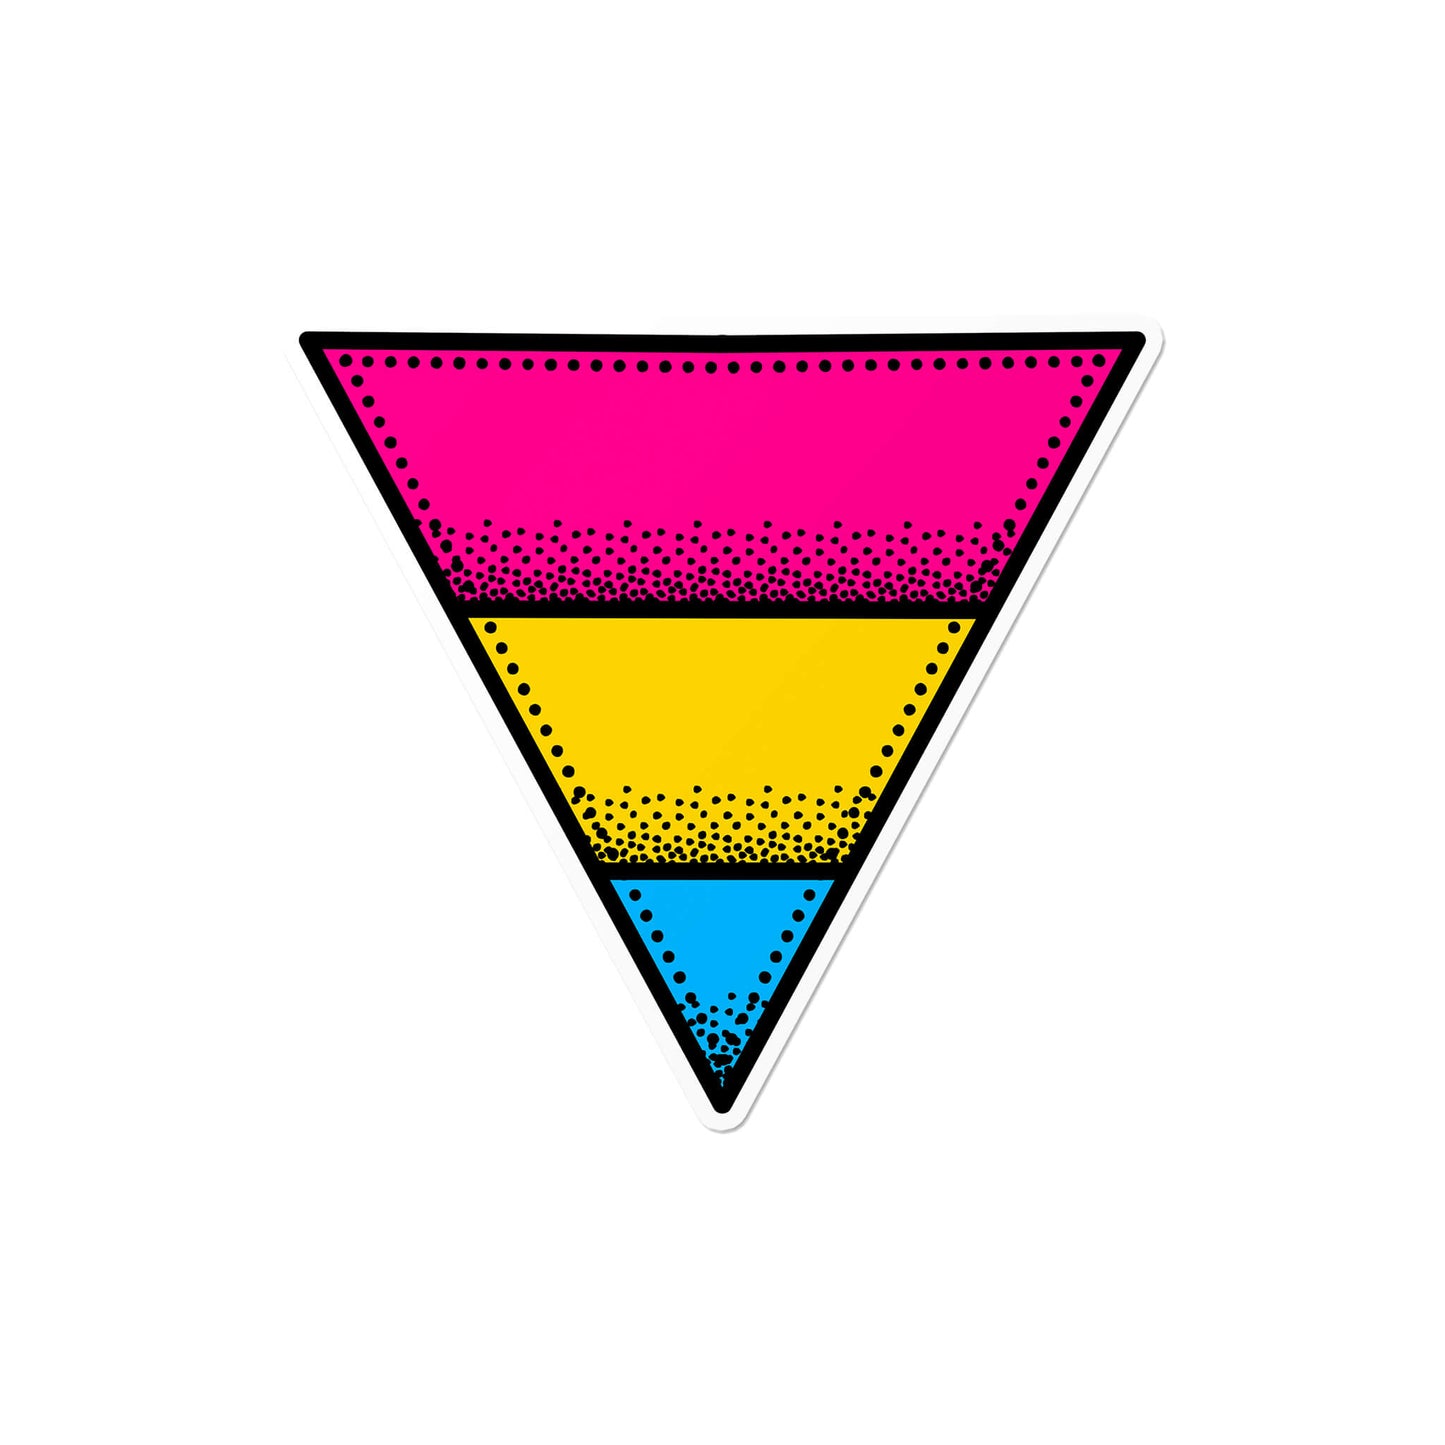 Pansexual Triangle Sticker